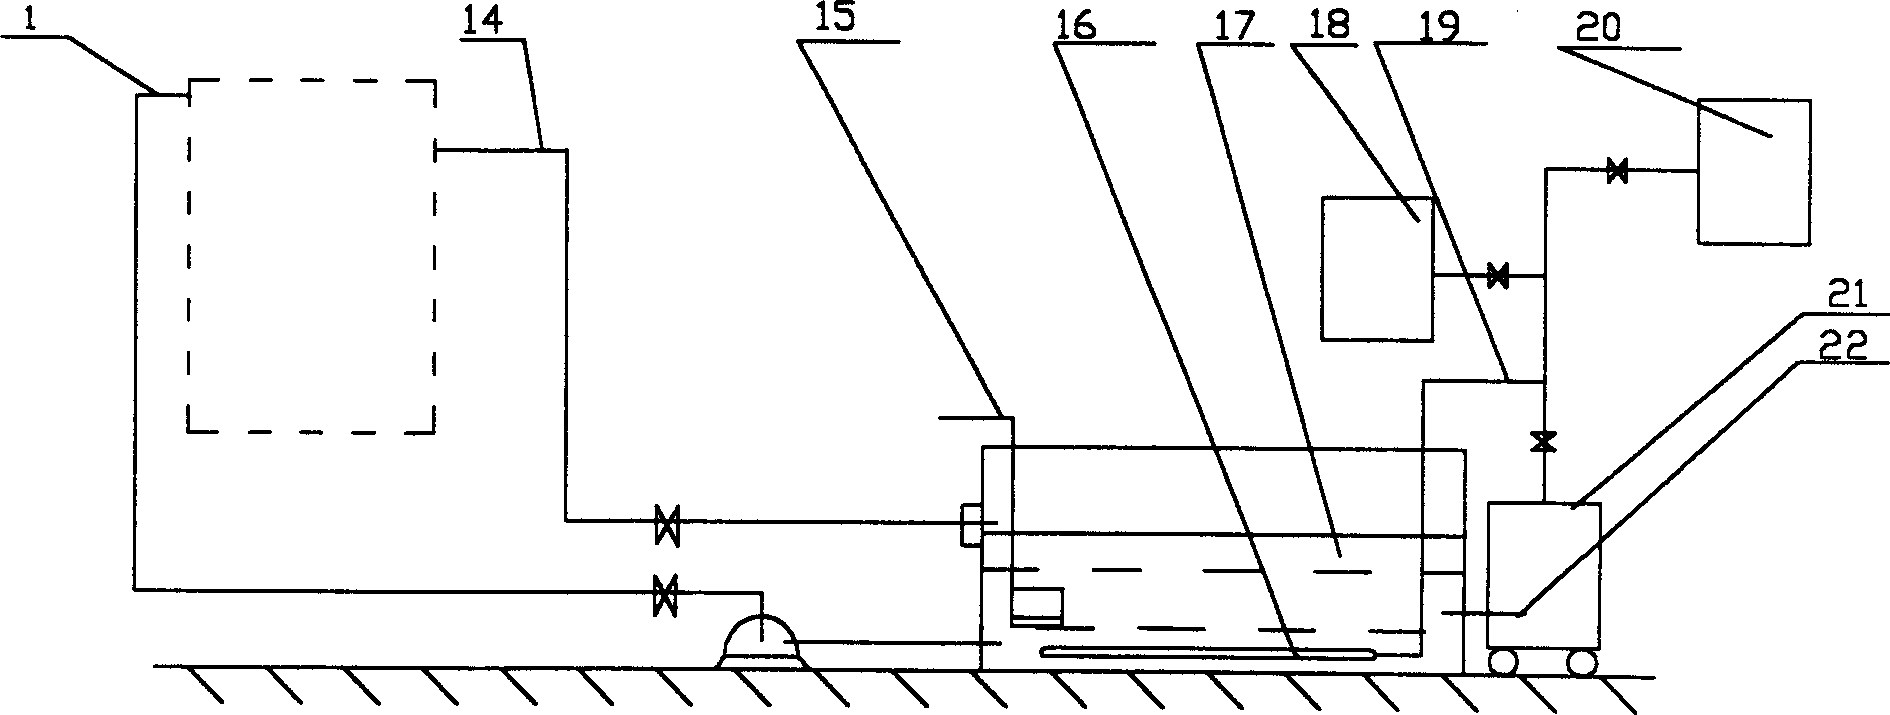 Galvanization apparatus and process of tube-type crystallizer